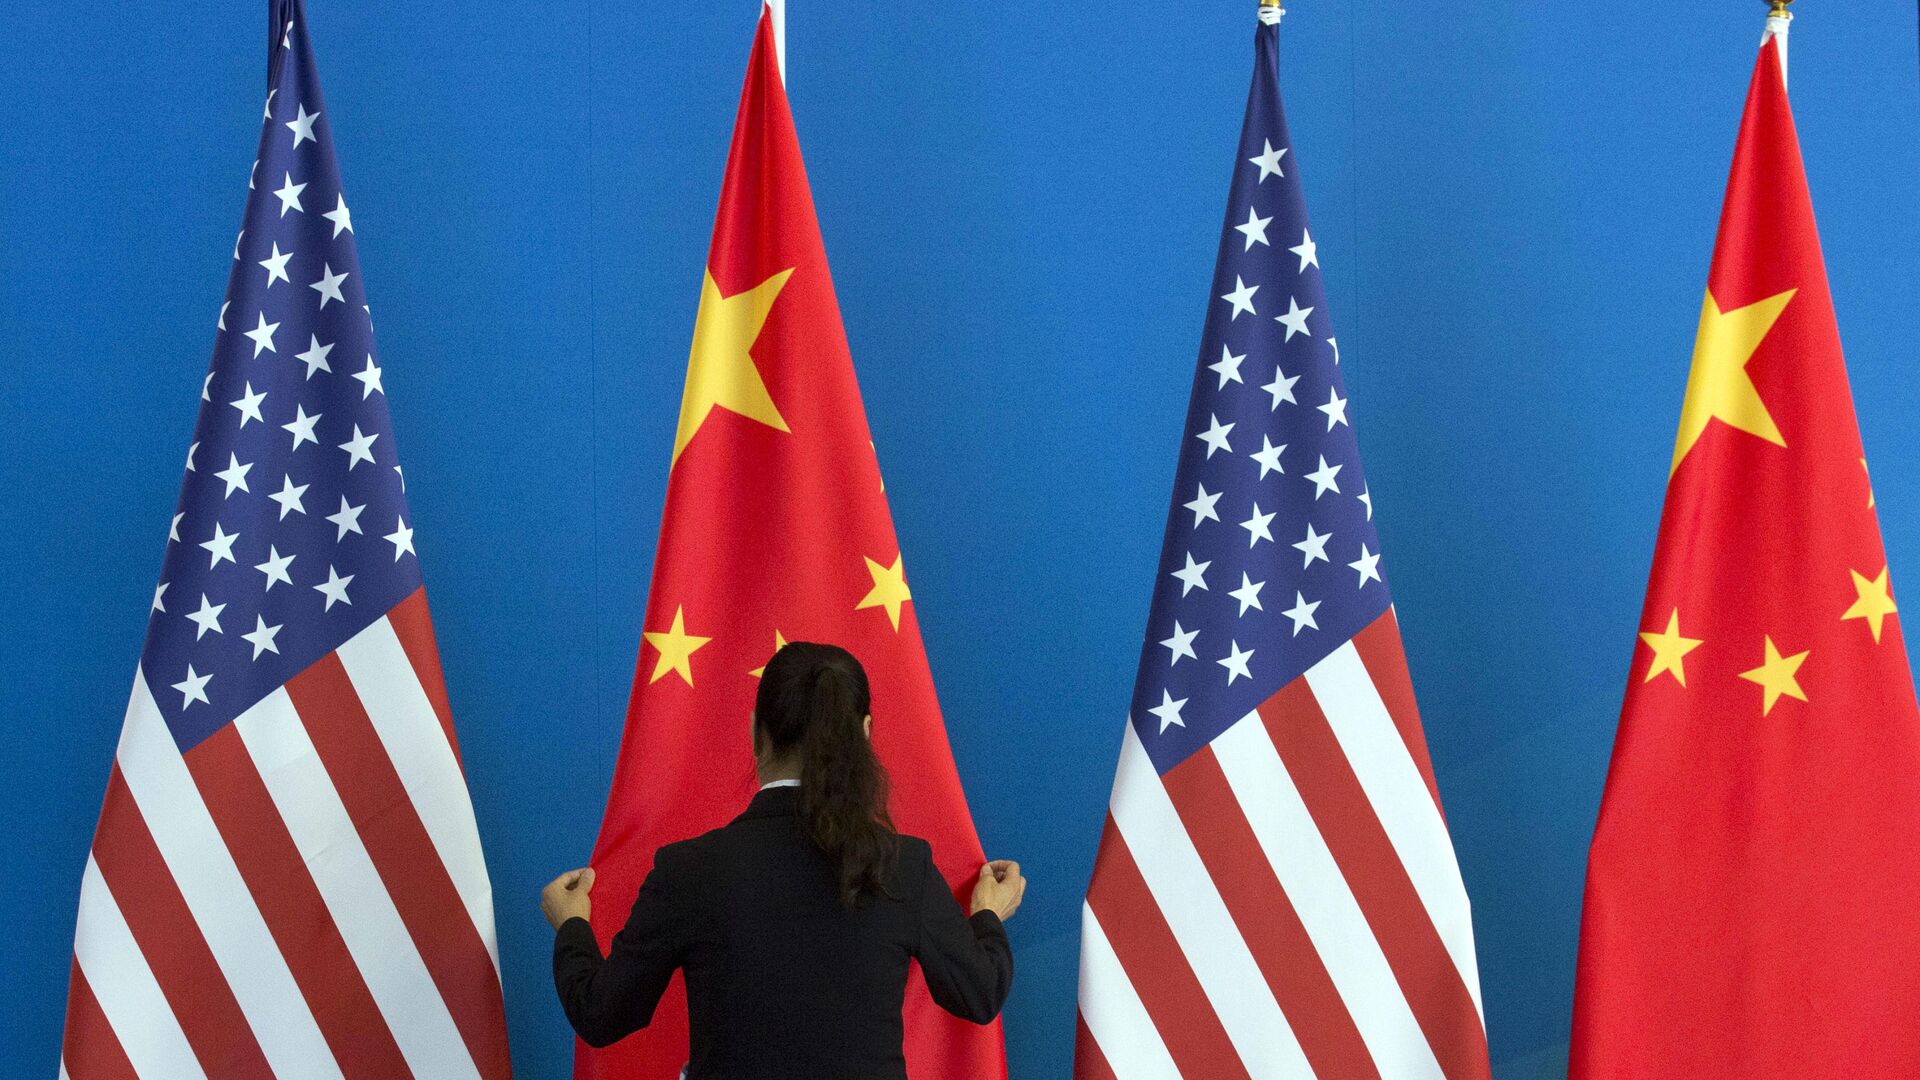 A Chinese woman adjusts the Chinese national flag near U.S. national flags before a Strategic Dialogue expanded meeting that's part of the U.S.-China Strategic and Economic Dialogue at the Diaoyutai State Guesthouse in Beijing, Thursday, July 10, 2014 - Sputnik International, 1920, 09.10.2021